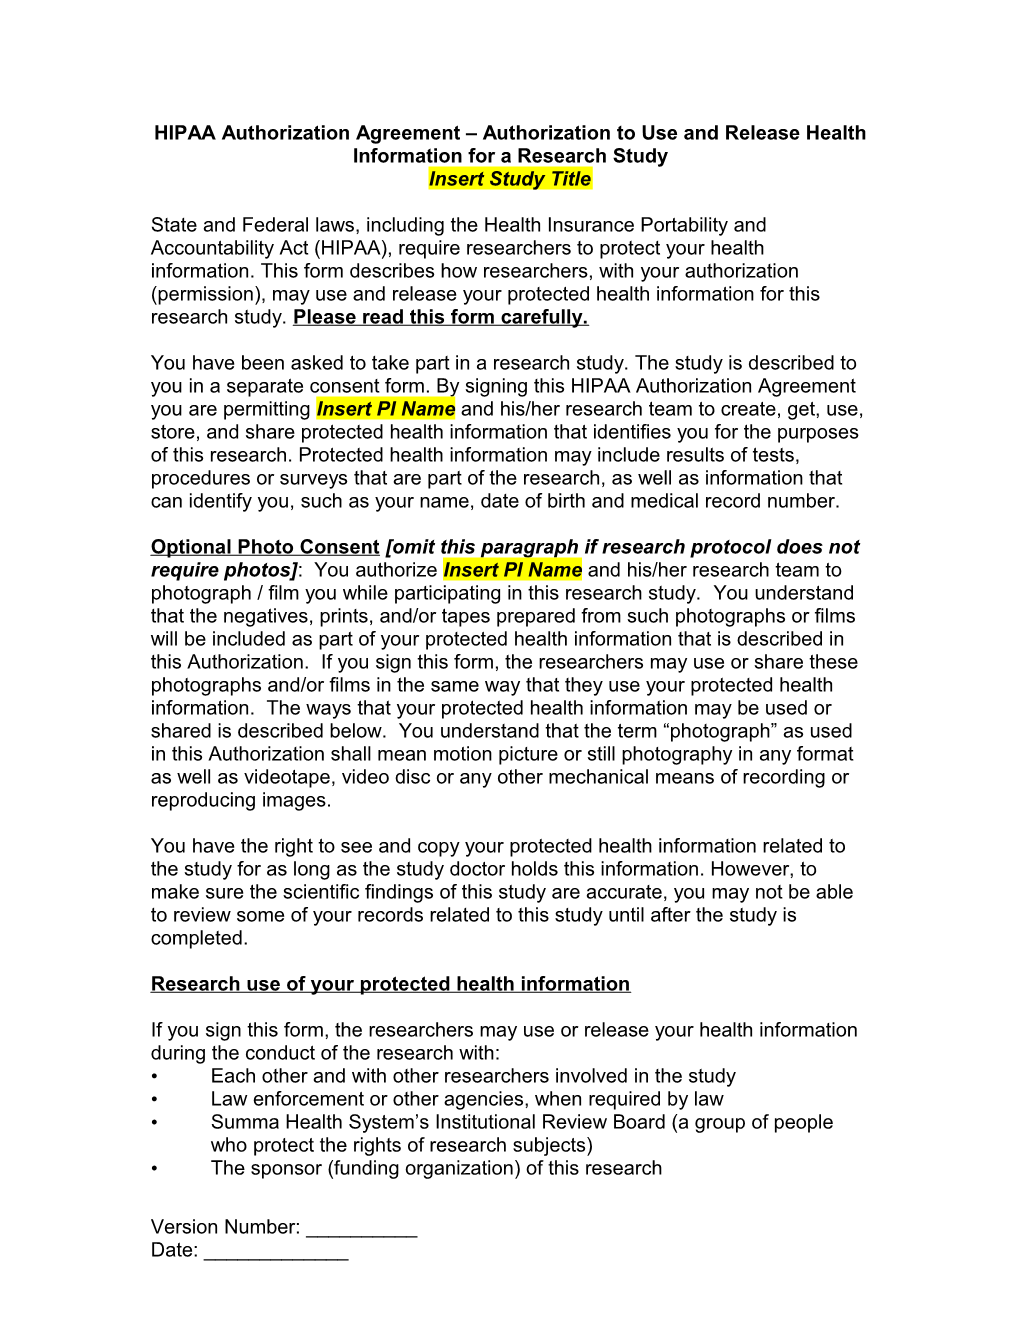 HIPAA Authorization Agreement Authorization to Use and Disclose (Release) Health Information